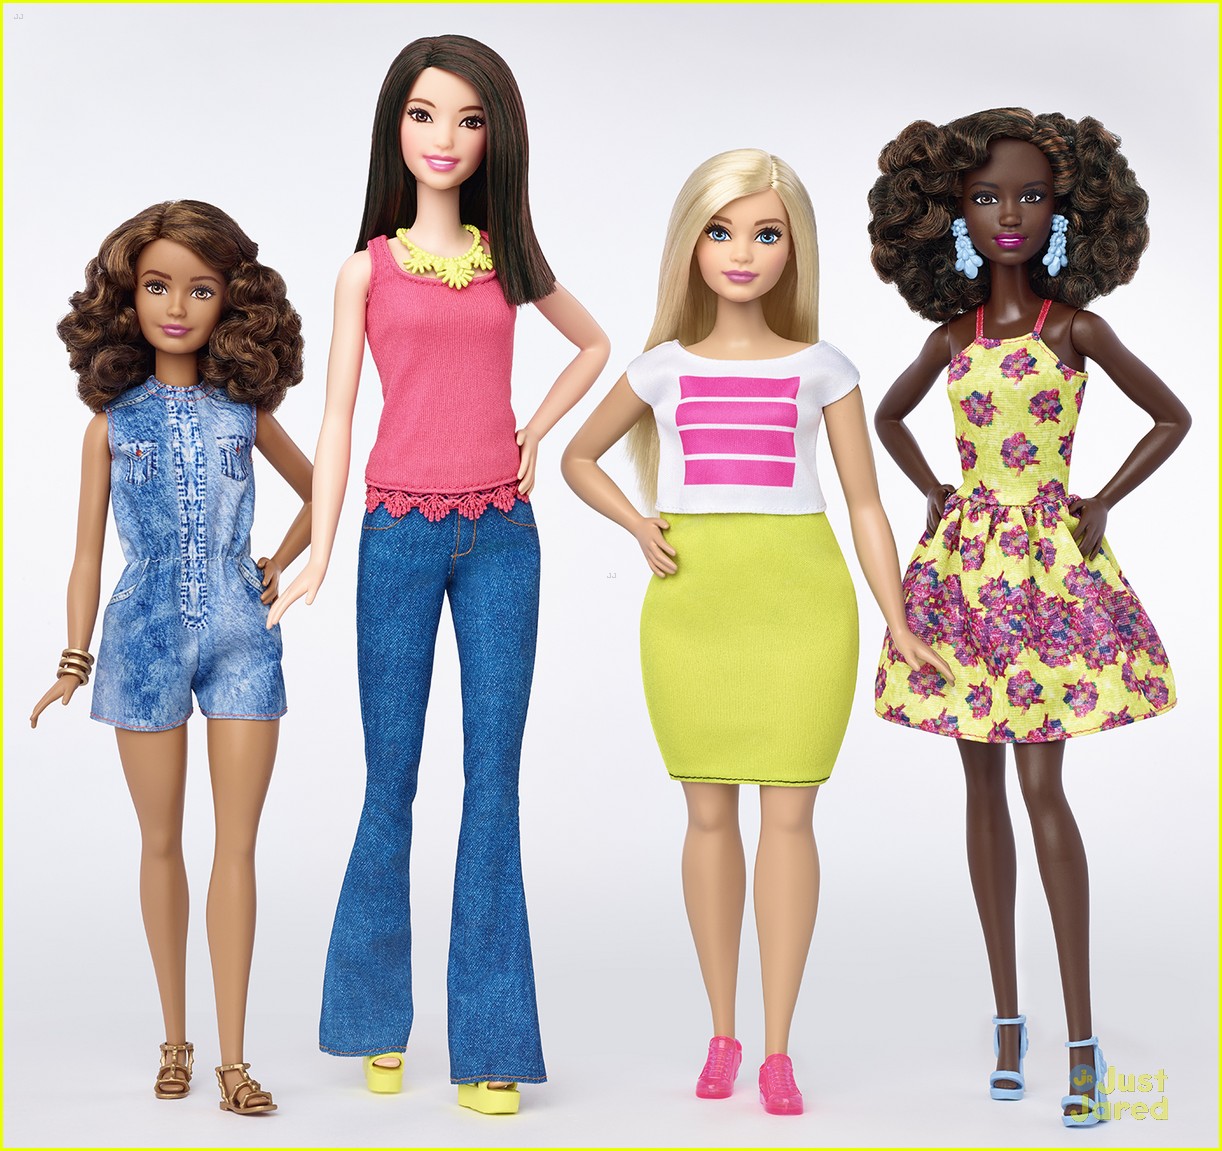 barbie fashionistas doll line makeover all dolls here 06